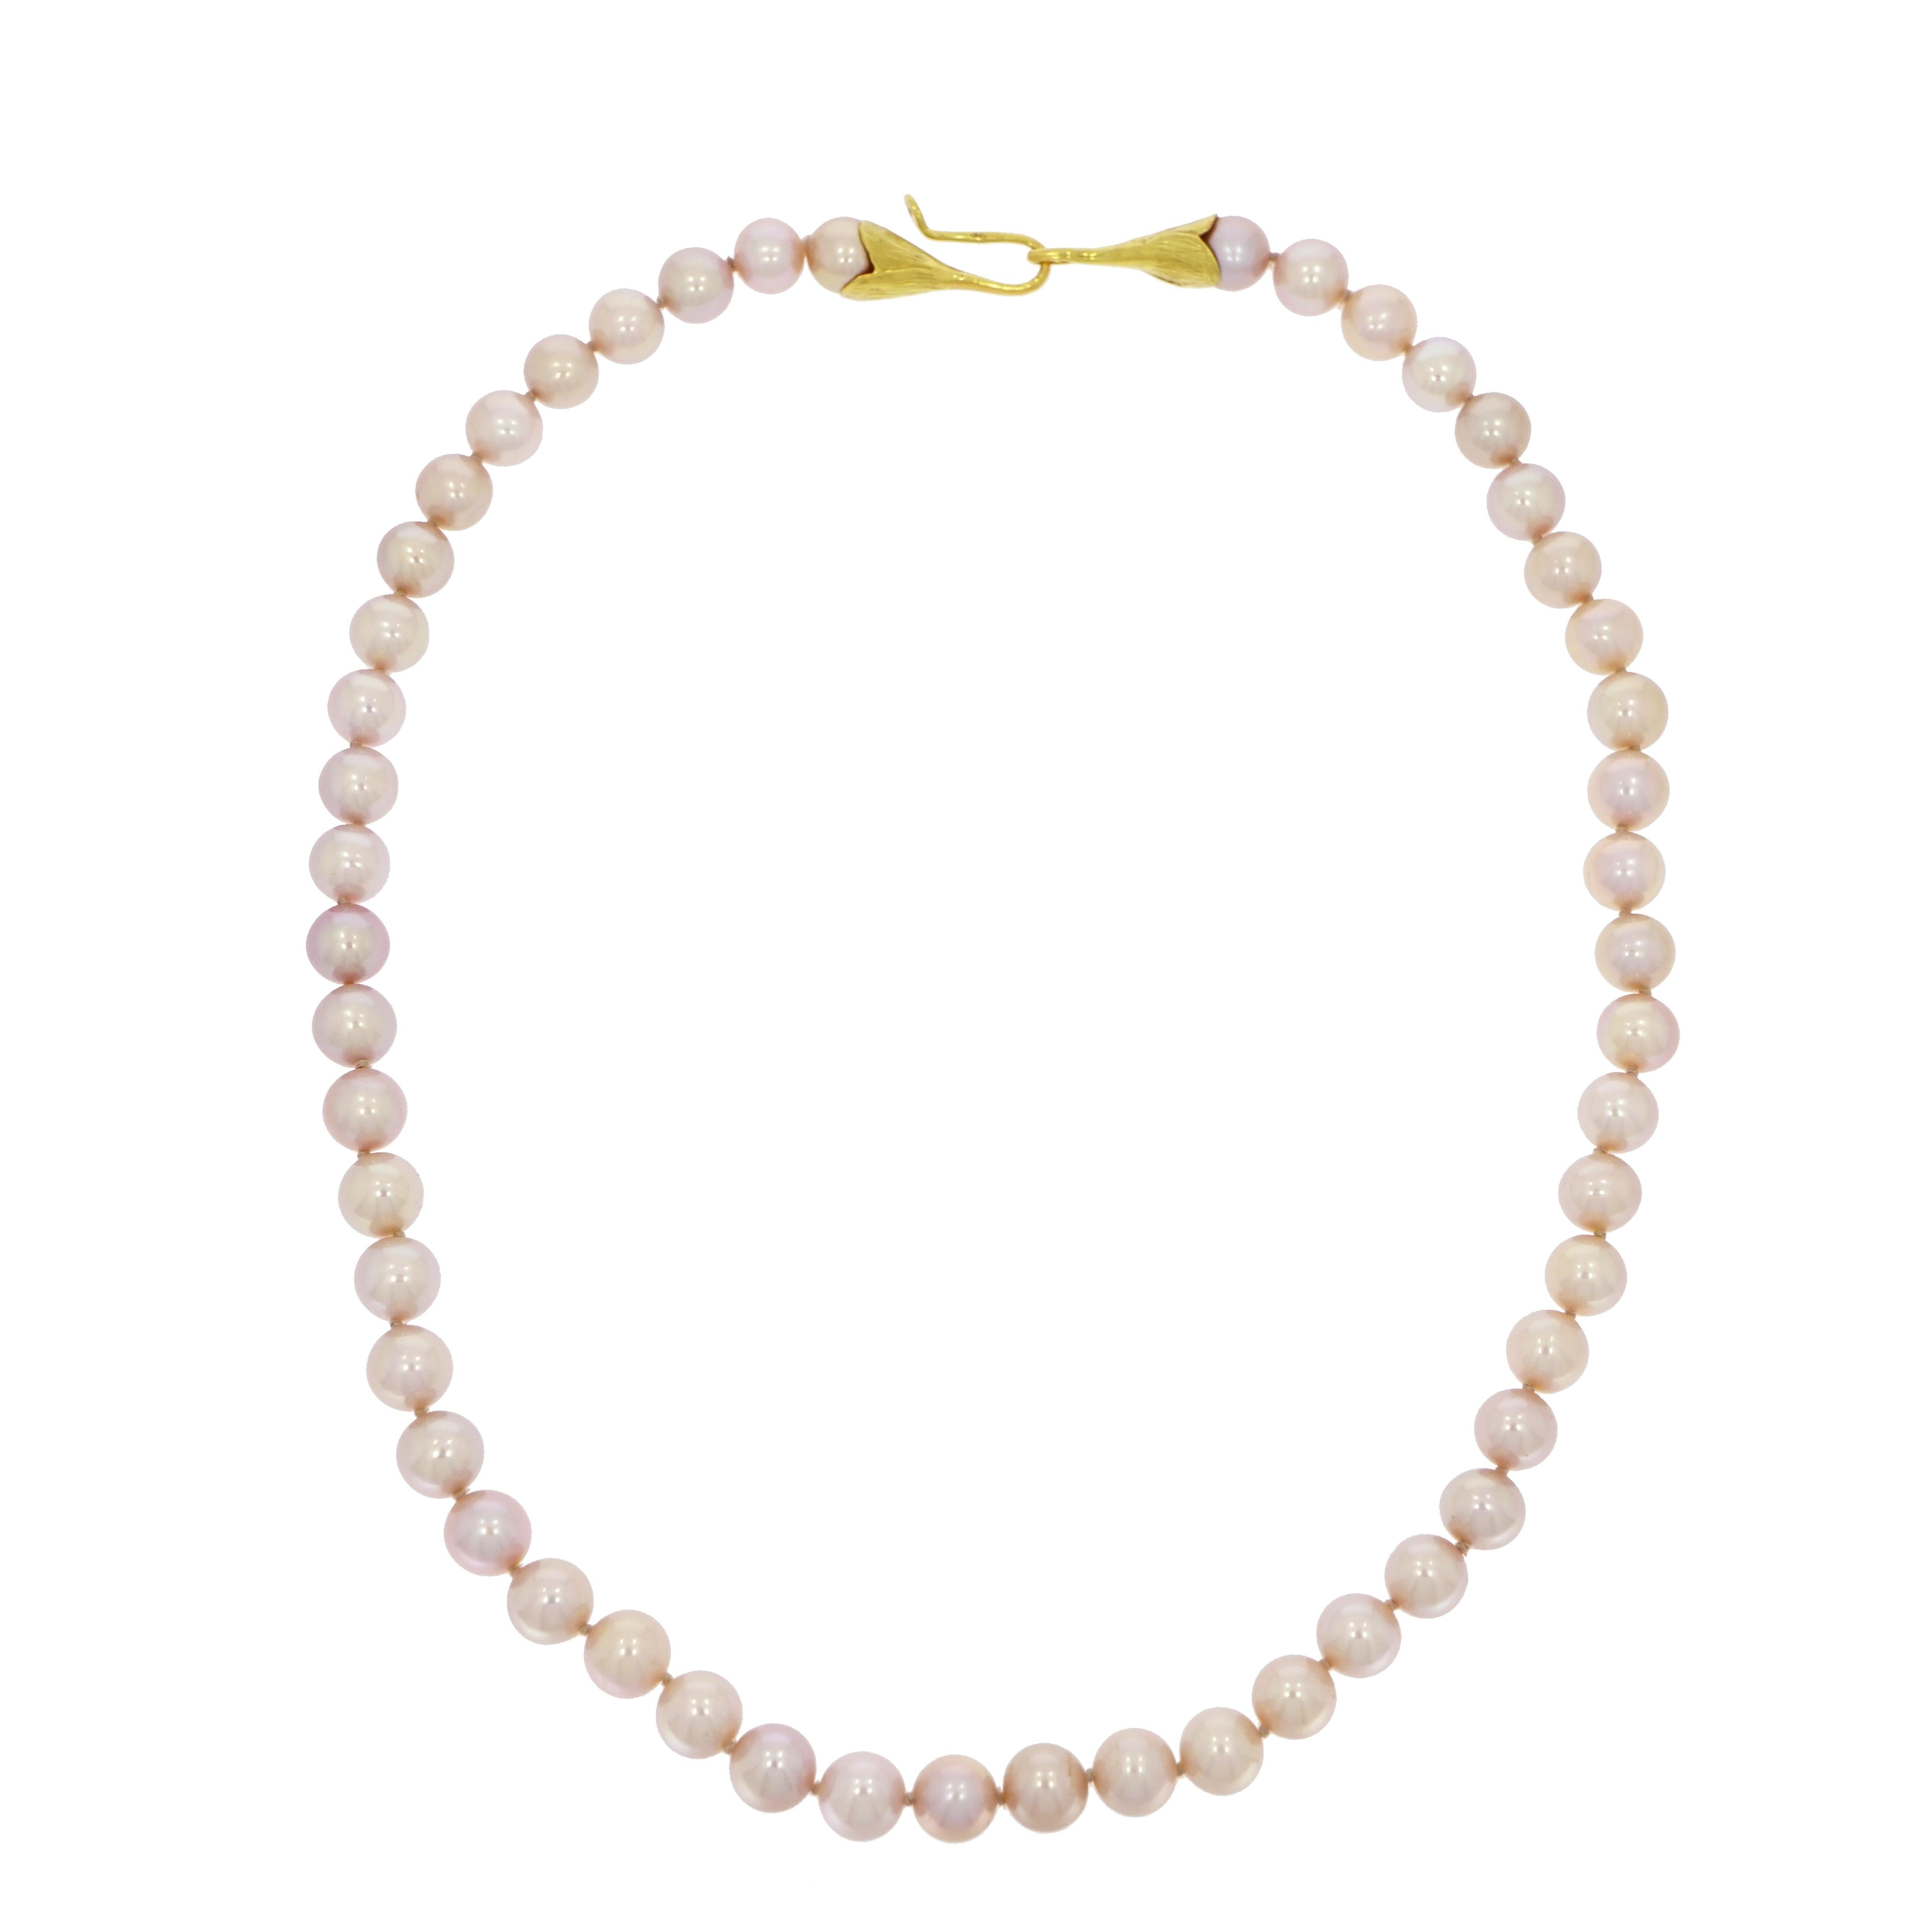 Purplish Pearl Necklace with Yellow Gold Clasp